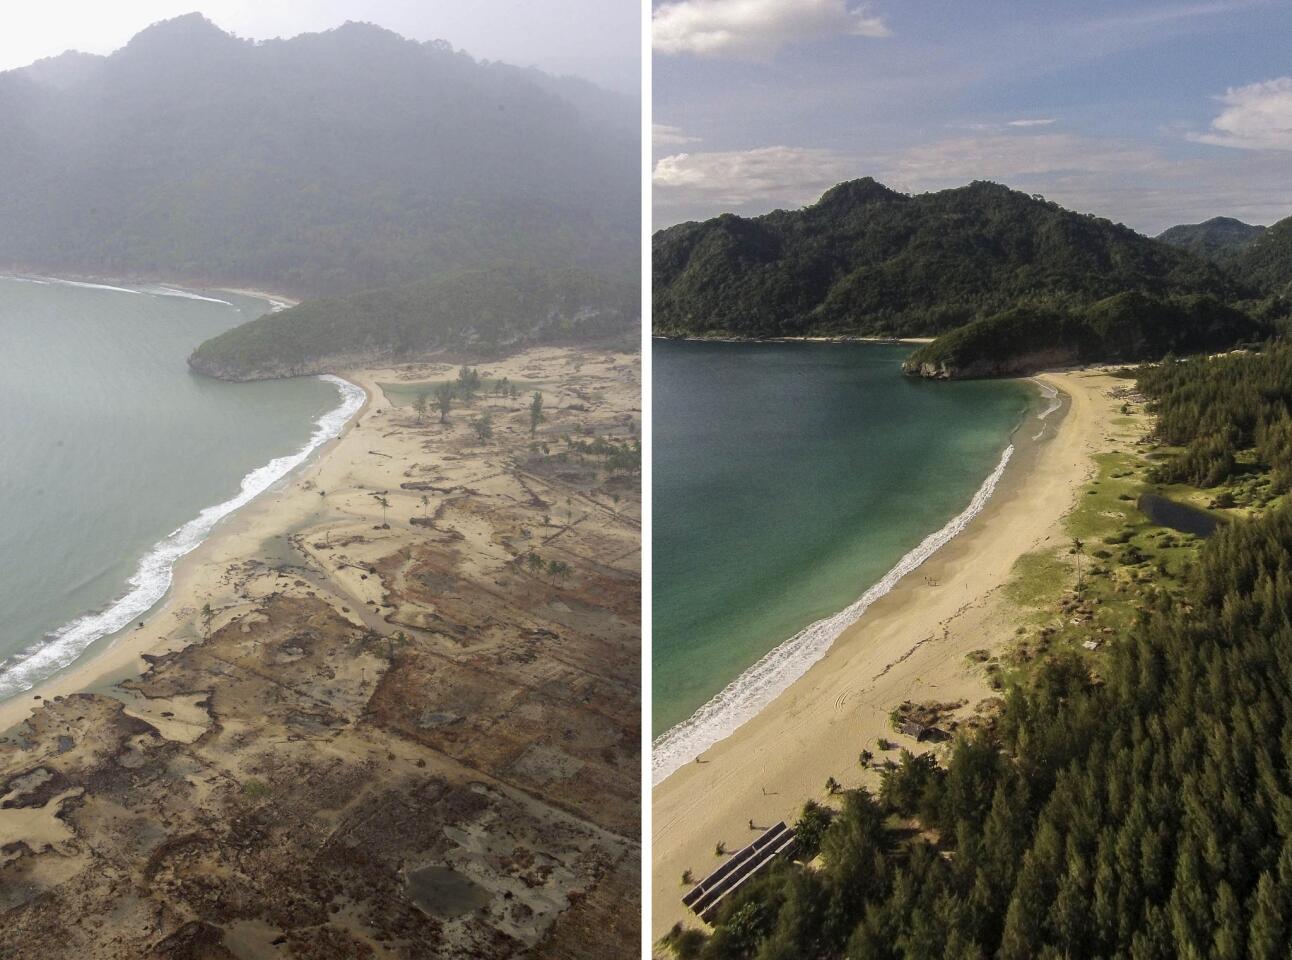 The coast west of Aceh as seen in January 2005 (left) and December 2014 (right).